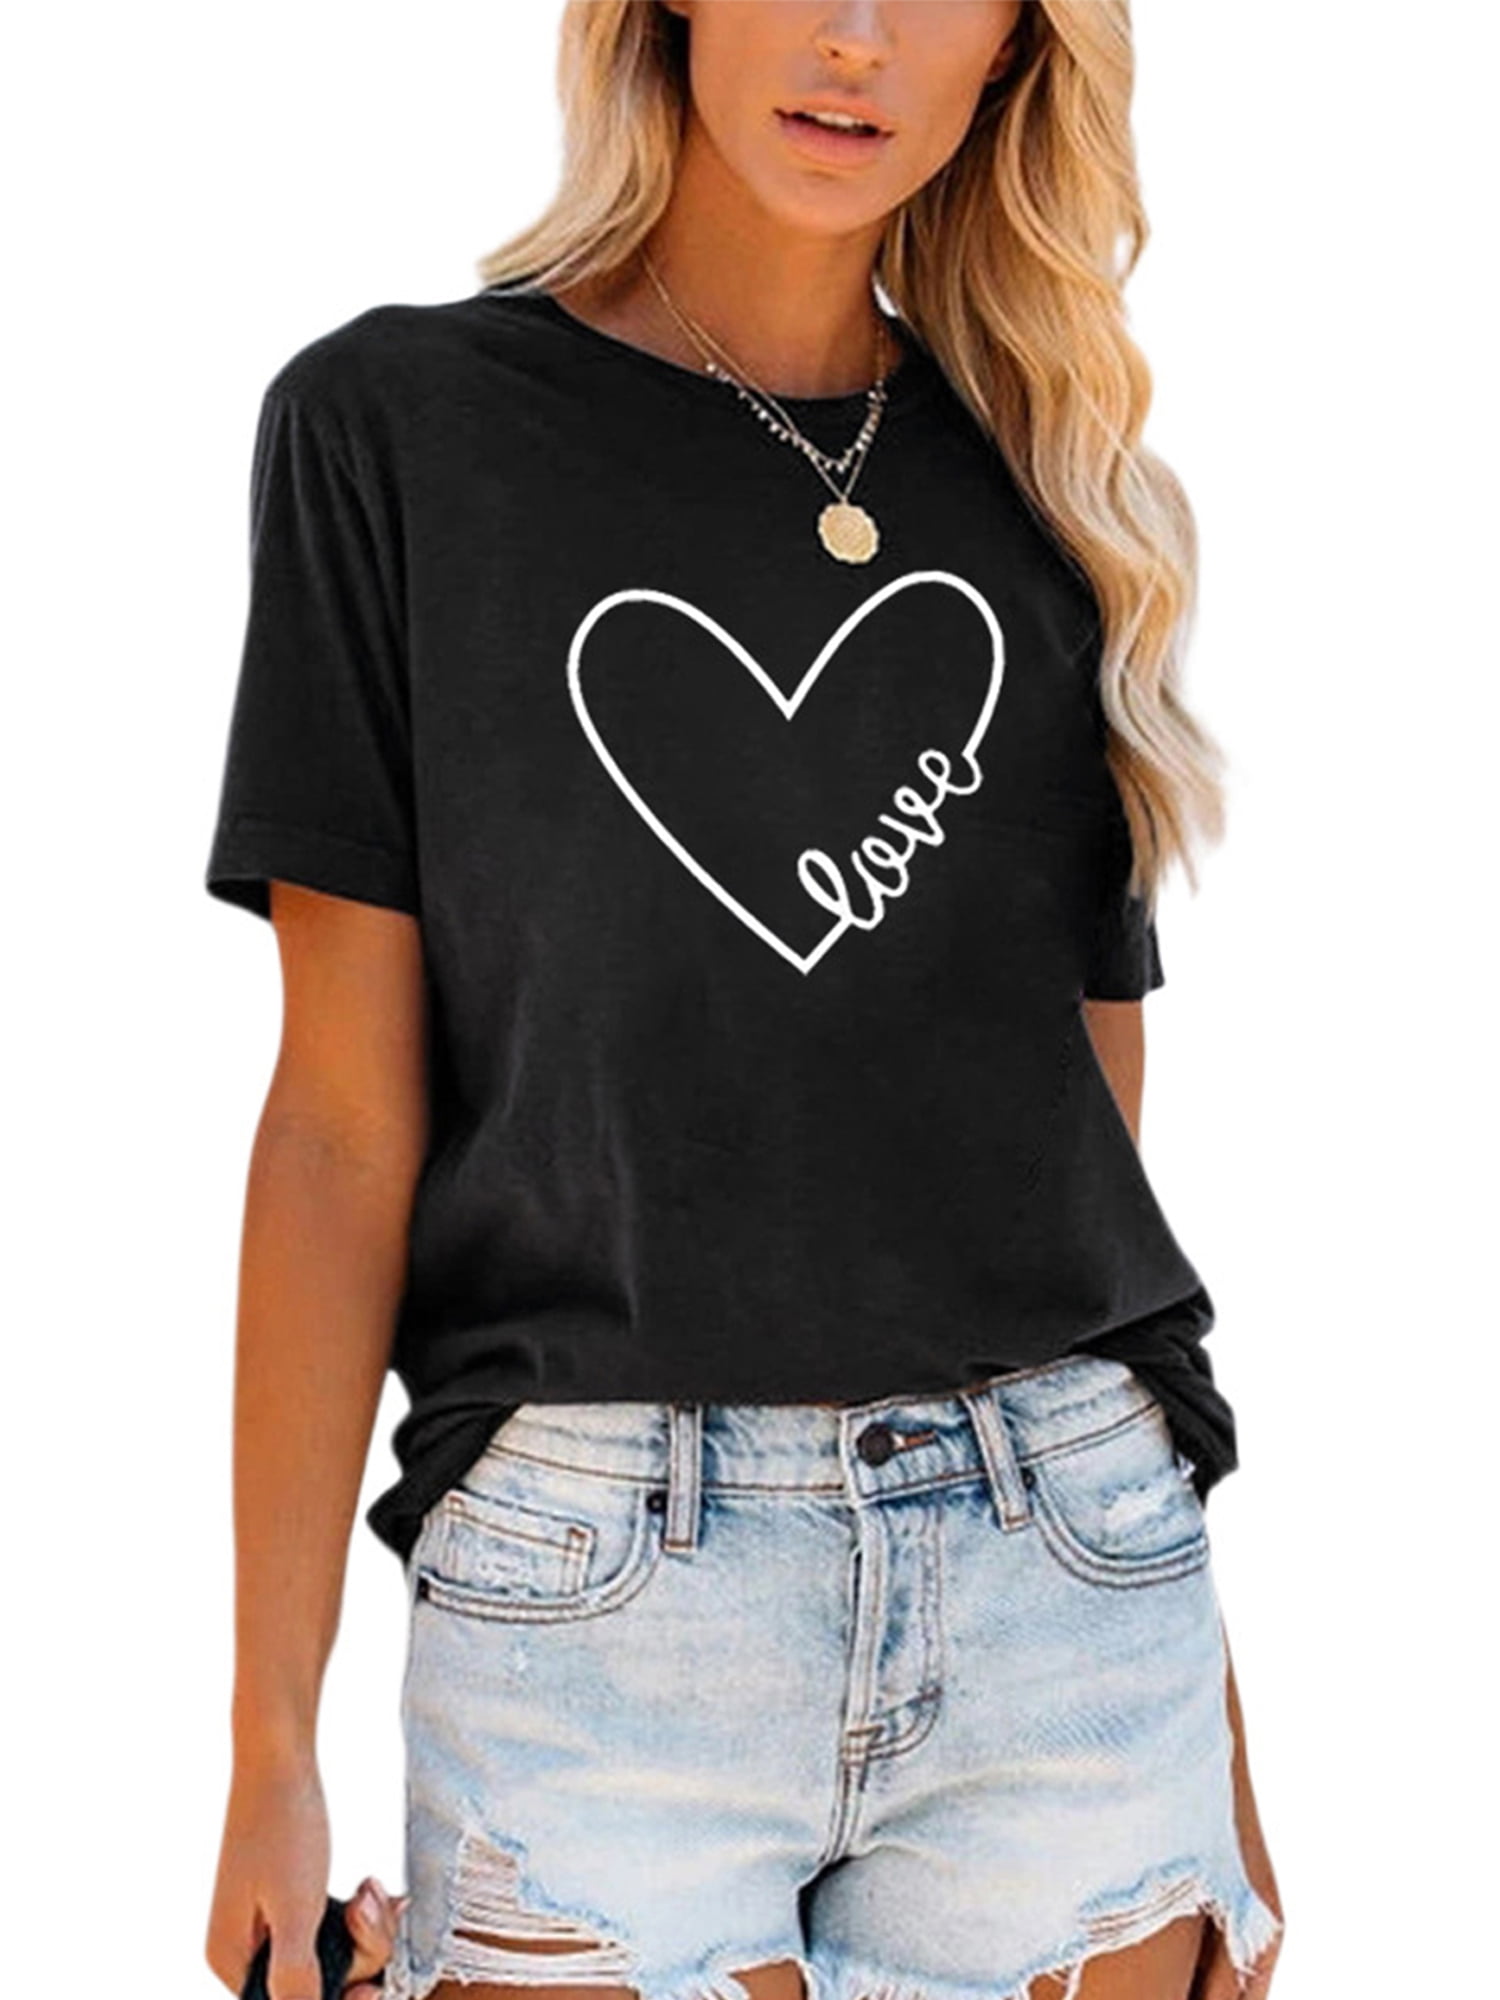 Hearts Pattern Doodle Valentine Love Shirts for Women Fashion Round Neck Shirt Casual Short Sleeve T-Shirt Top Blouses XL 